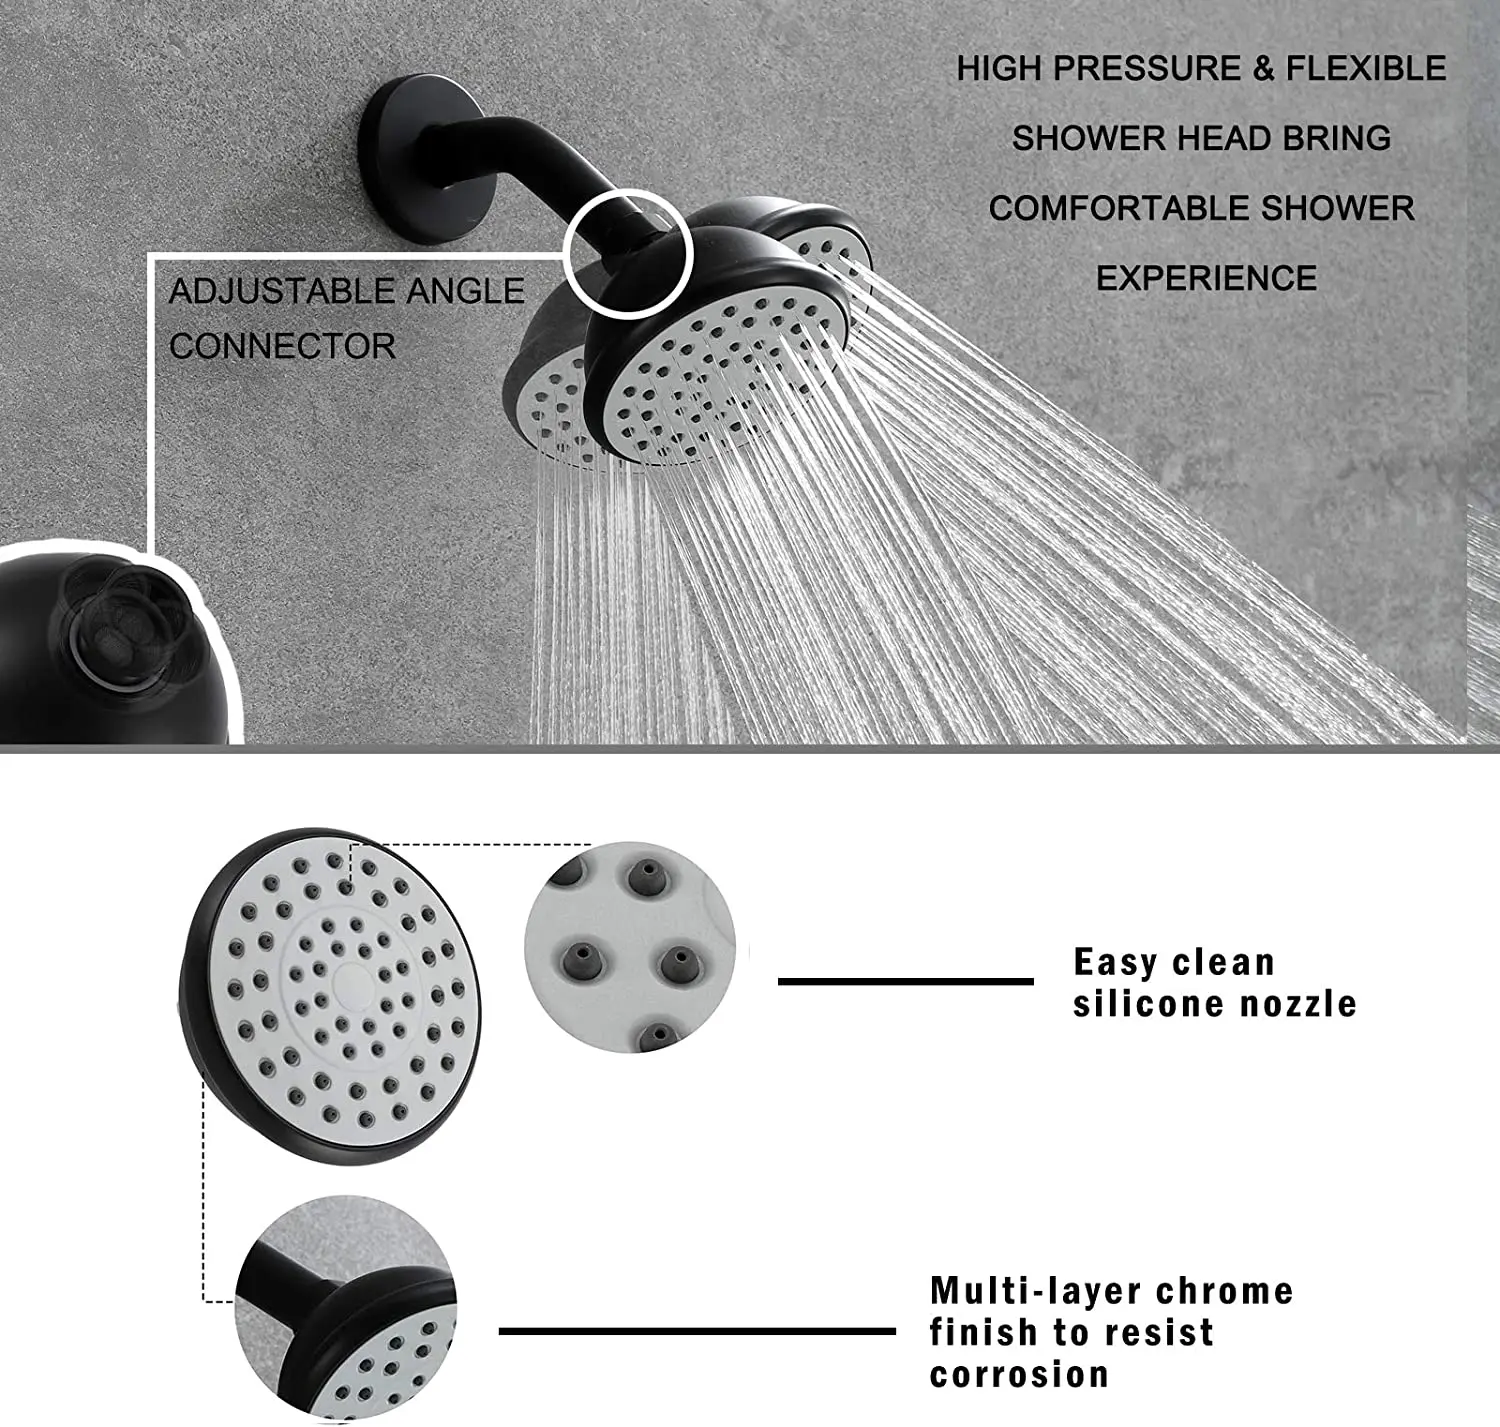 
Aquacubic Pressure Balance Valve UPC Wall Mounted Bathroom Shower Faucet hot and cold 